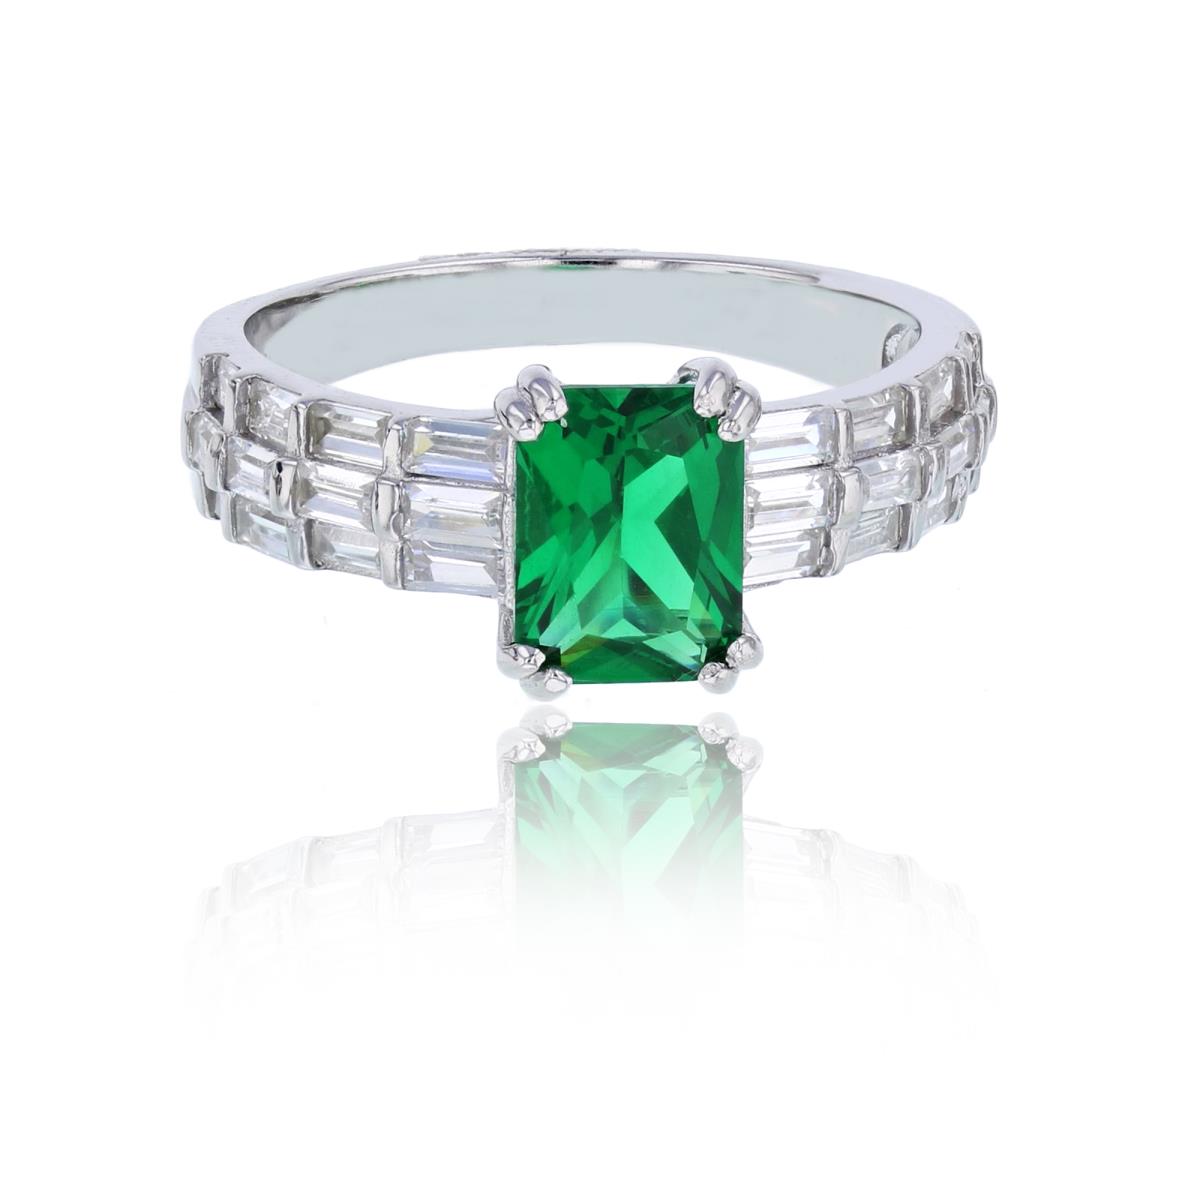 Sterling Silver Rhodium 8x6mm Green Emerald Cut CZ & White Graduated Baguette Sides Fashion Ring